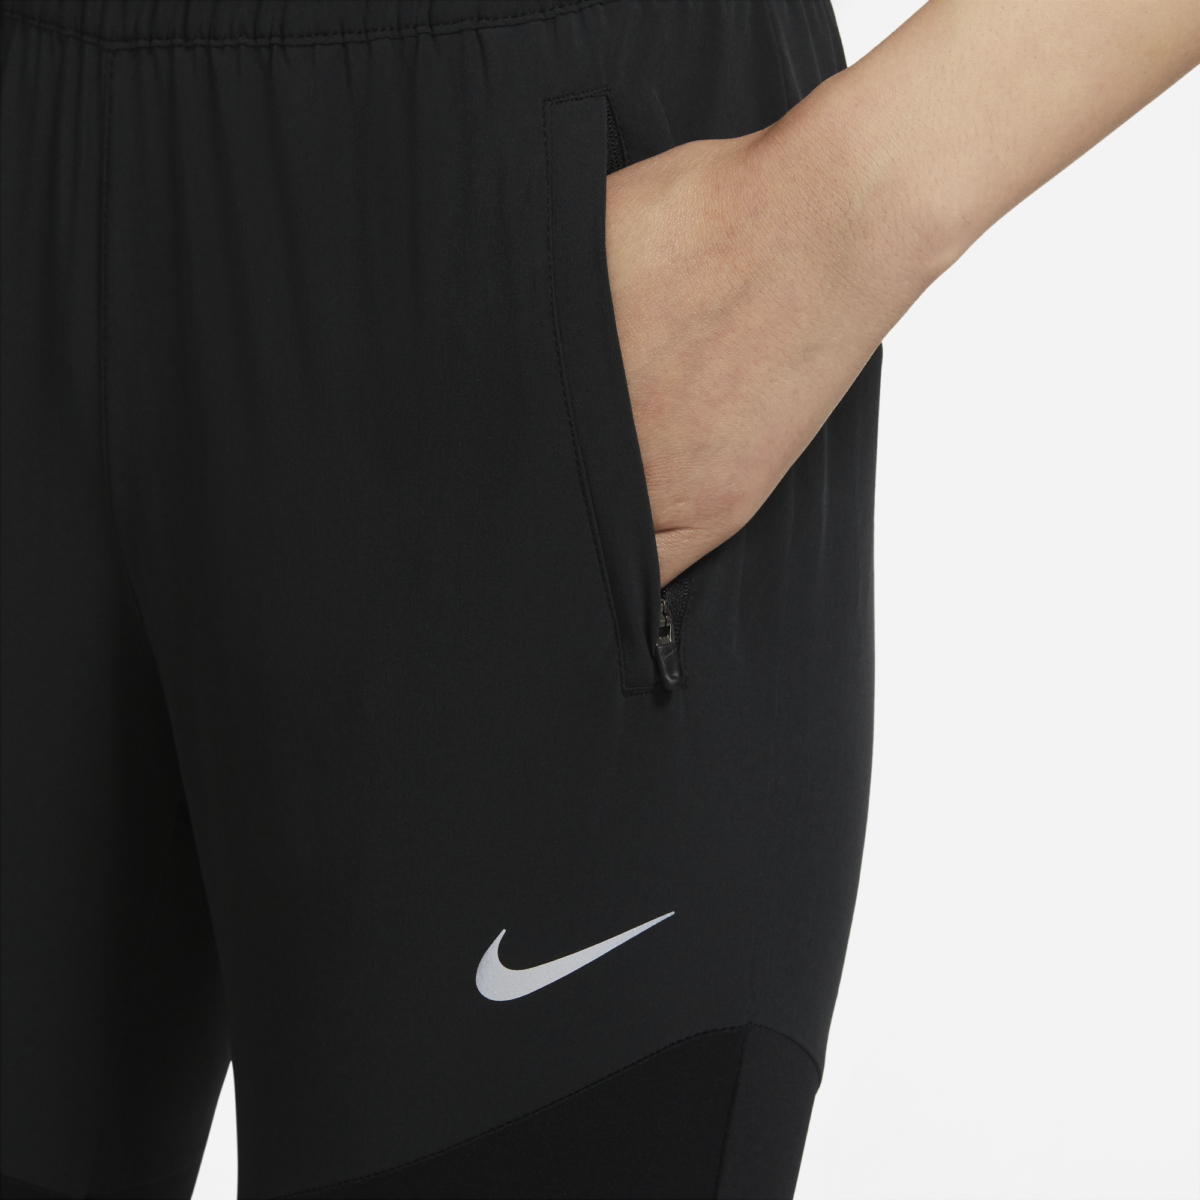 WOMENS NIKE DRI-FIT ESSENTIAL RUNNING PANTS TROUSERS SIZE M (DH6975 369)